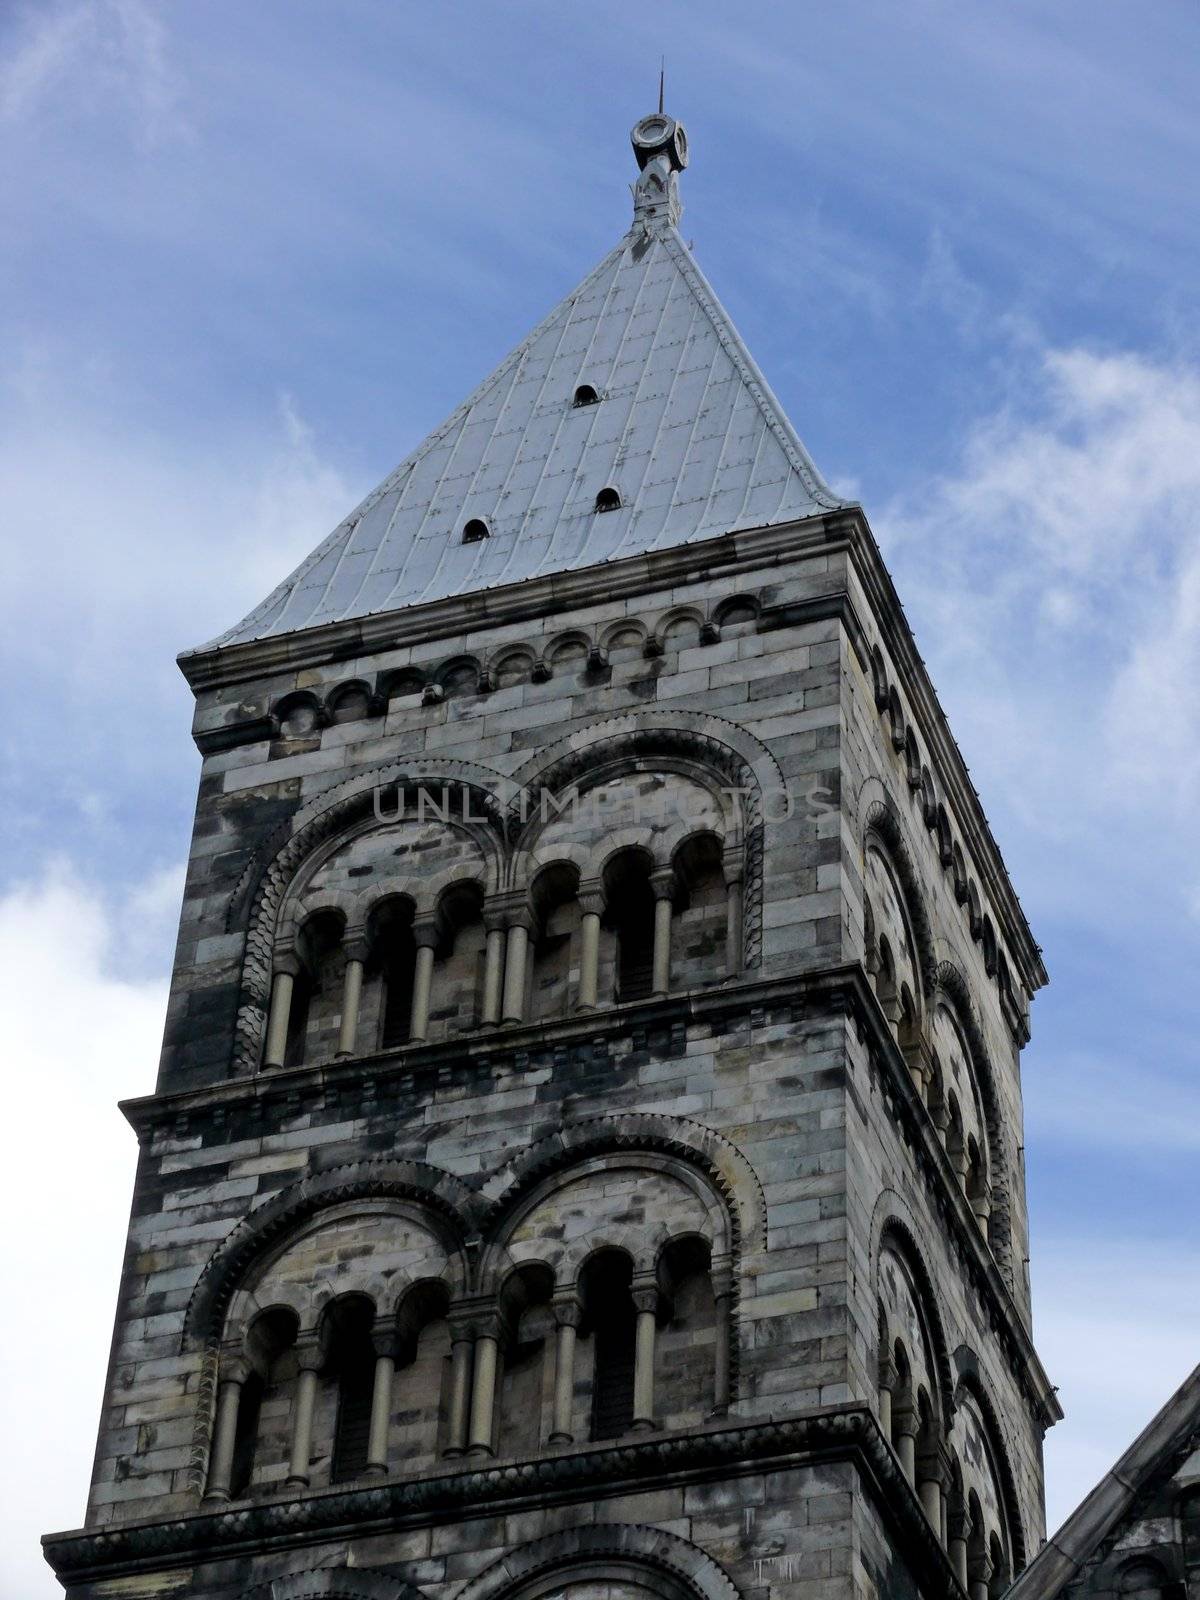 portrait of Cathedral of Lund, Sweden built 1085